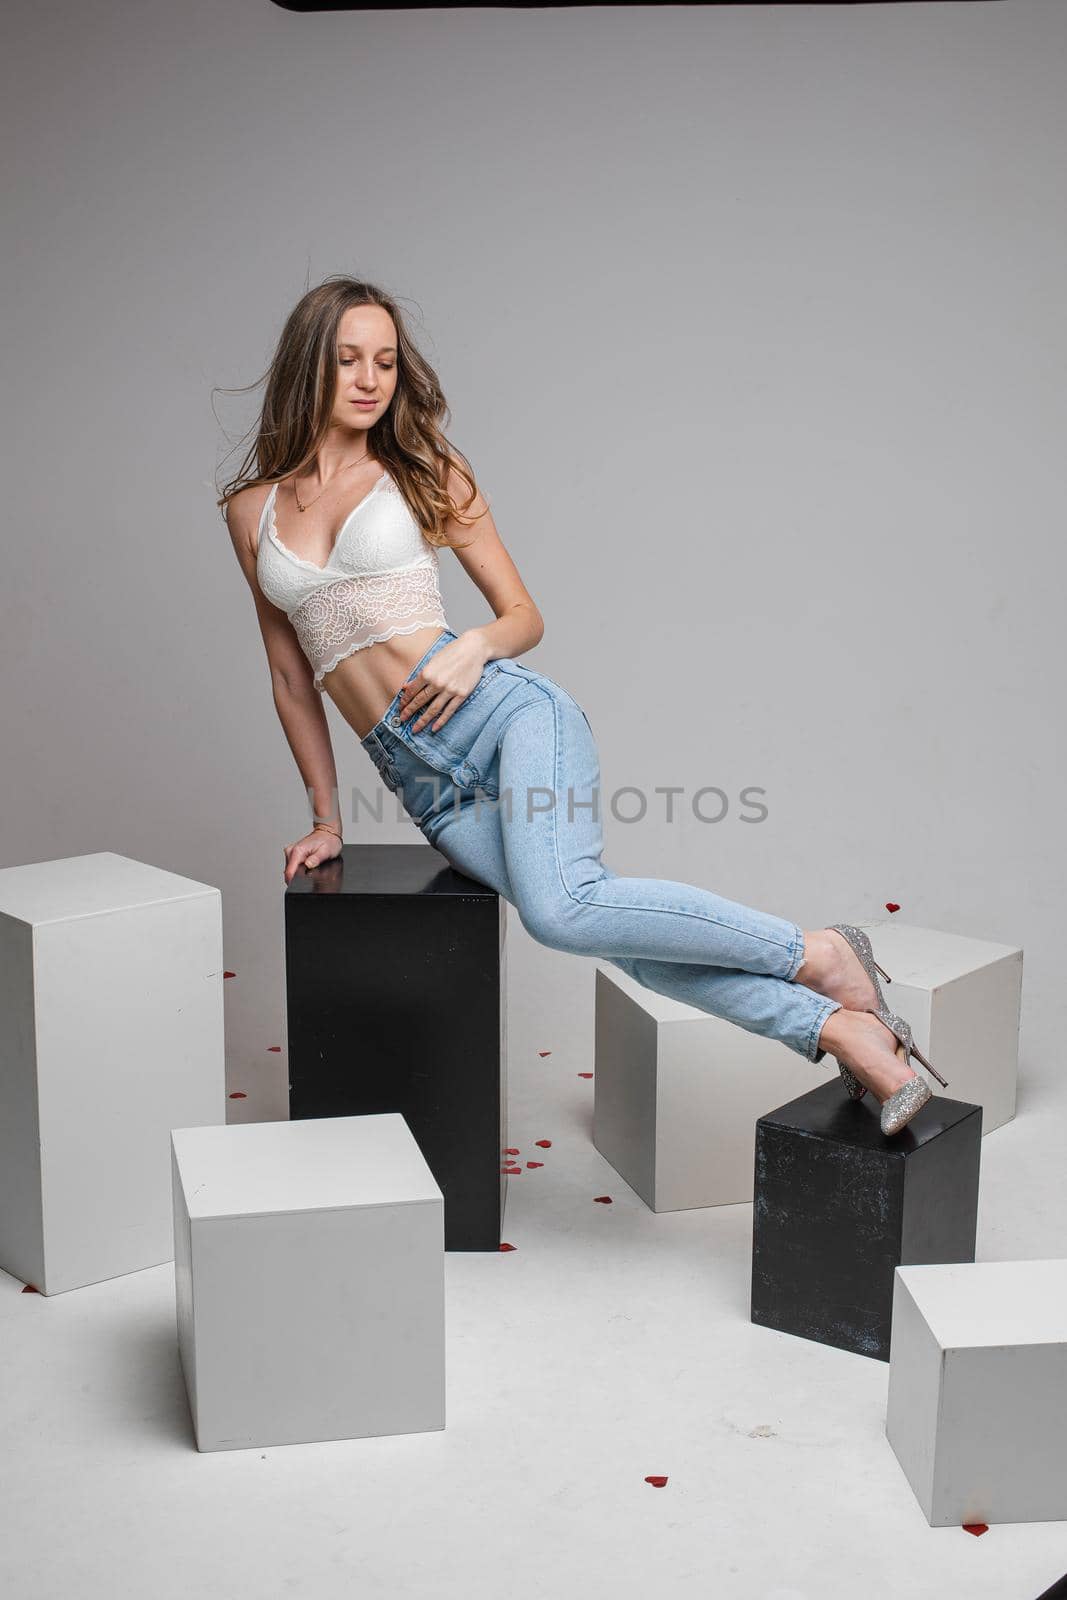 beautiuful caucasian woman with charming appearance sits on a white cubes and looks to the camera, picture isolated on white background